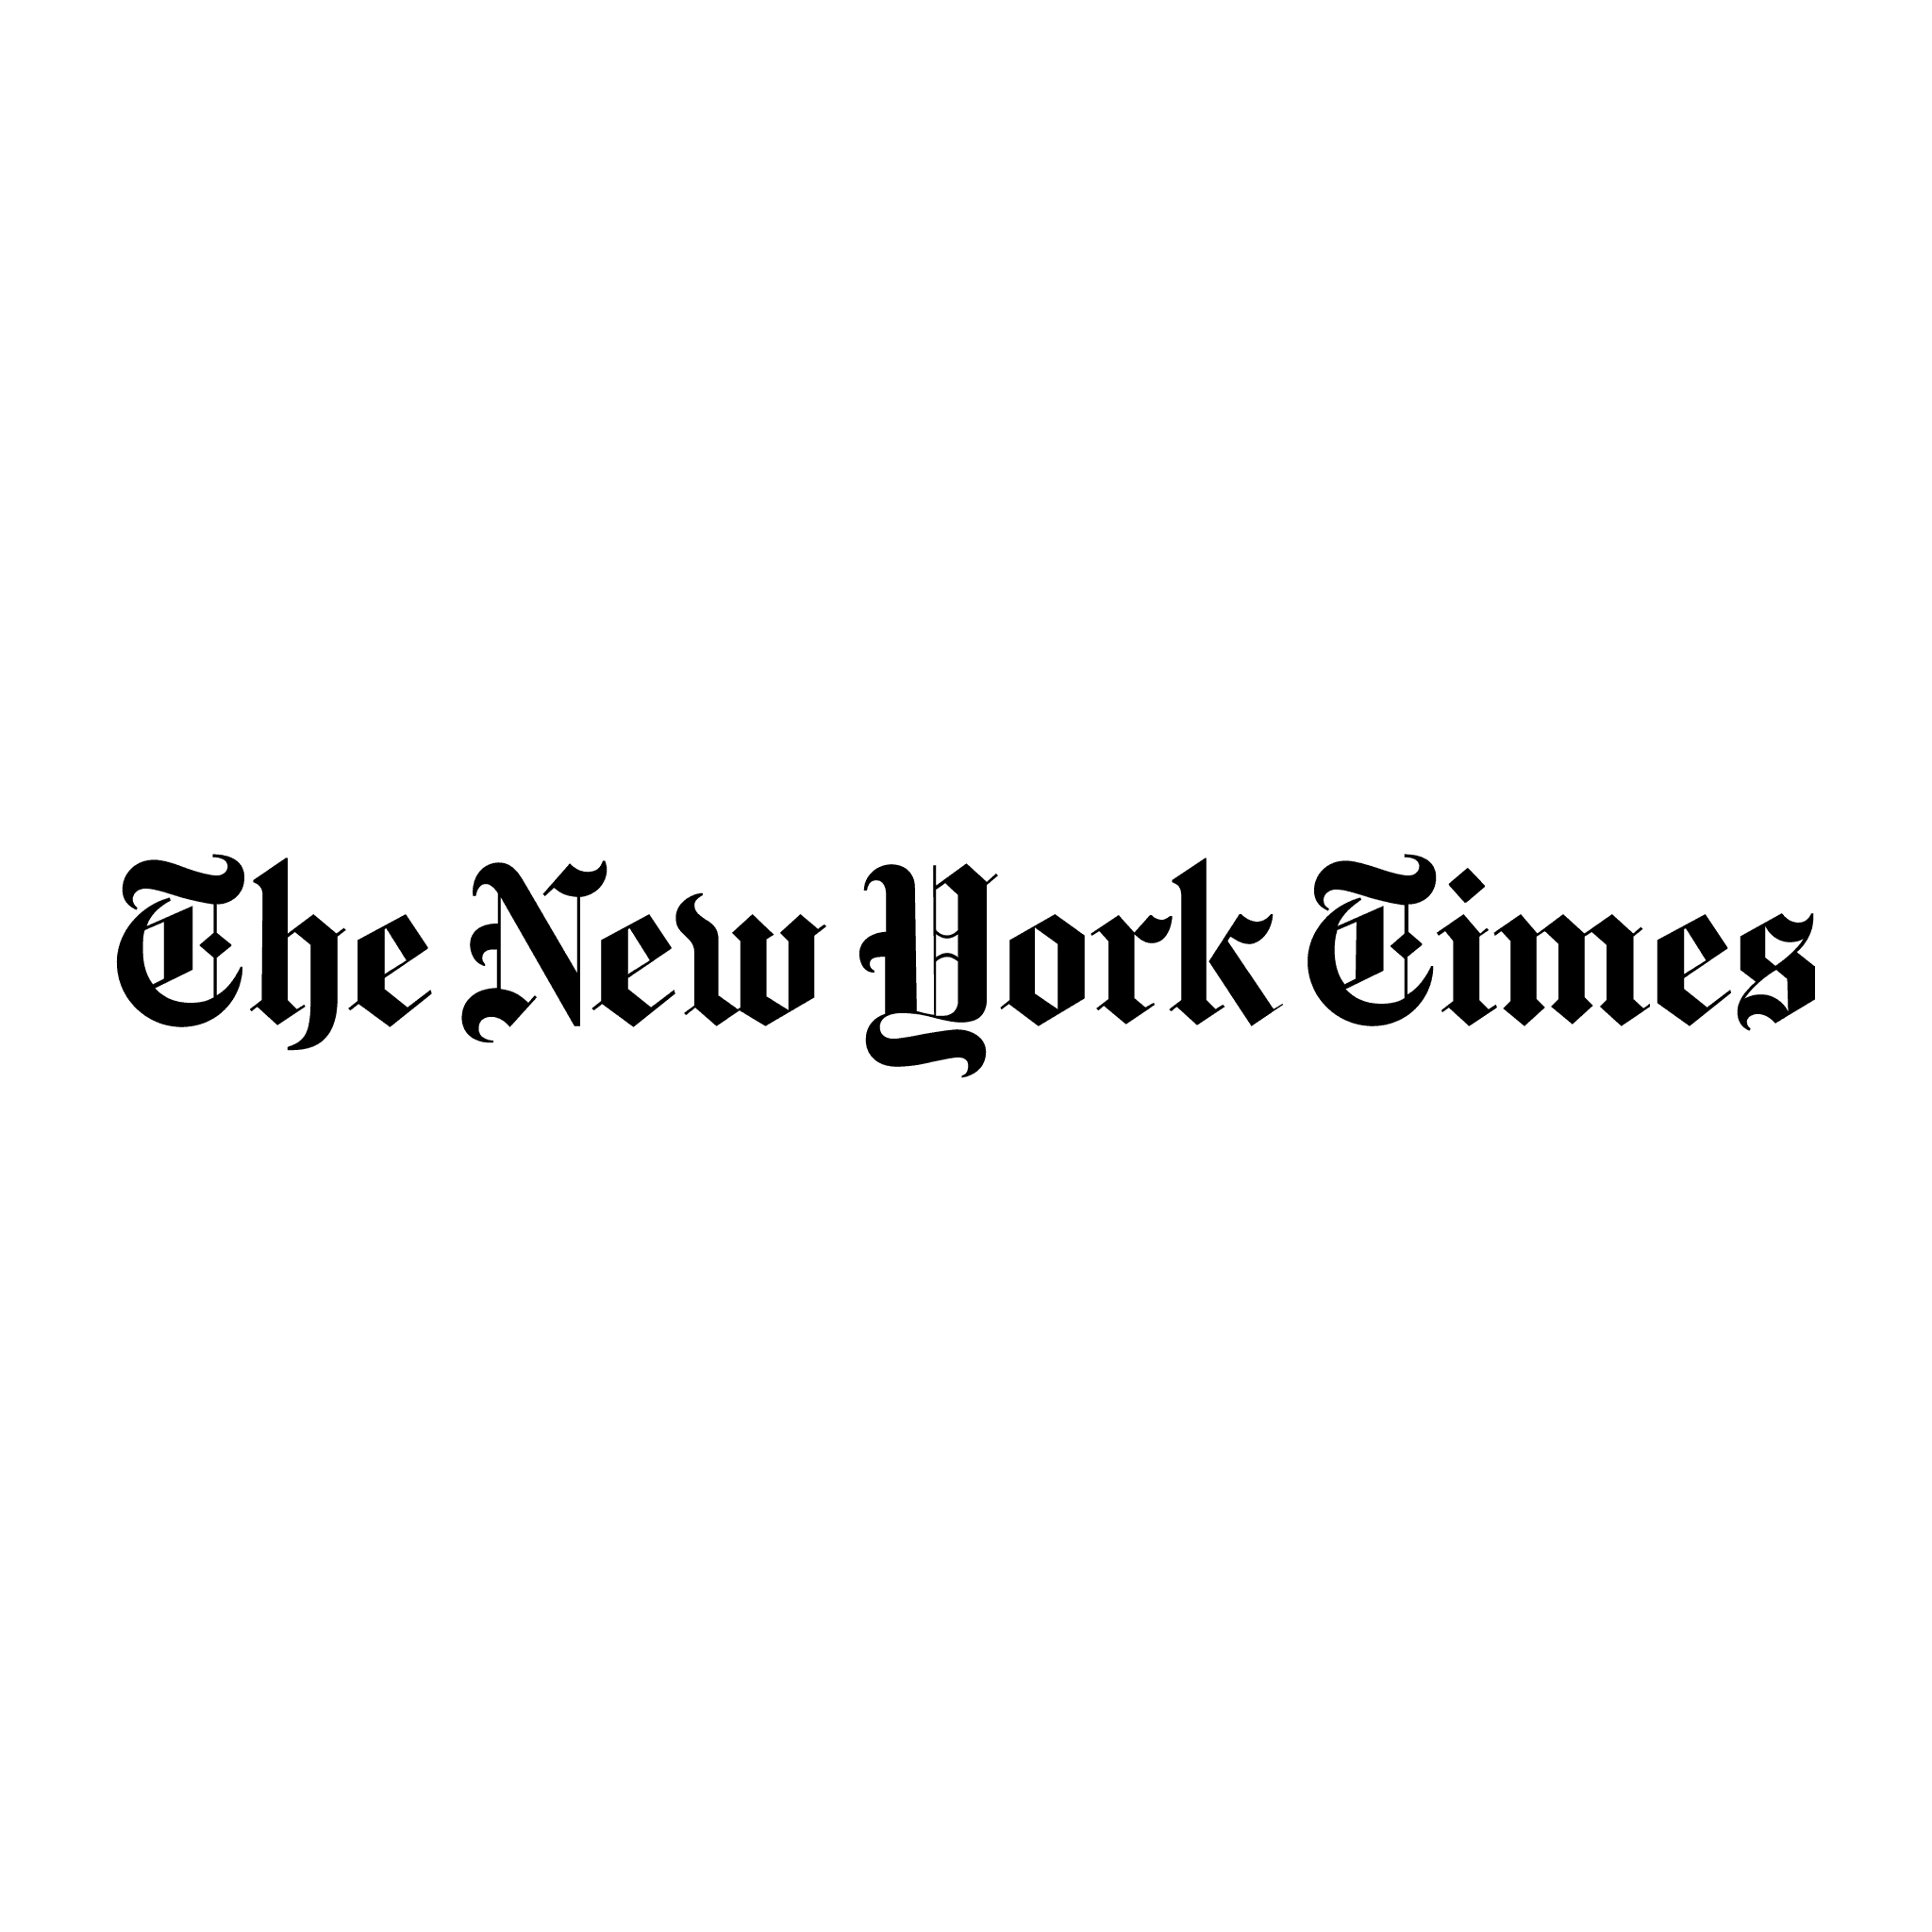 svg the new york times